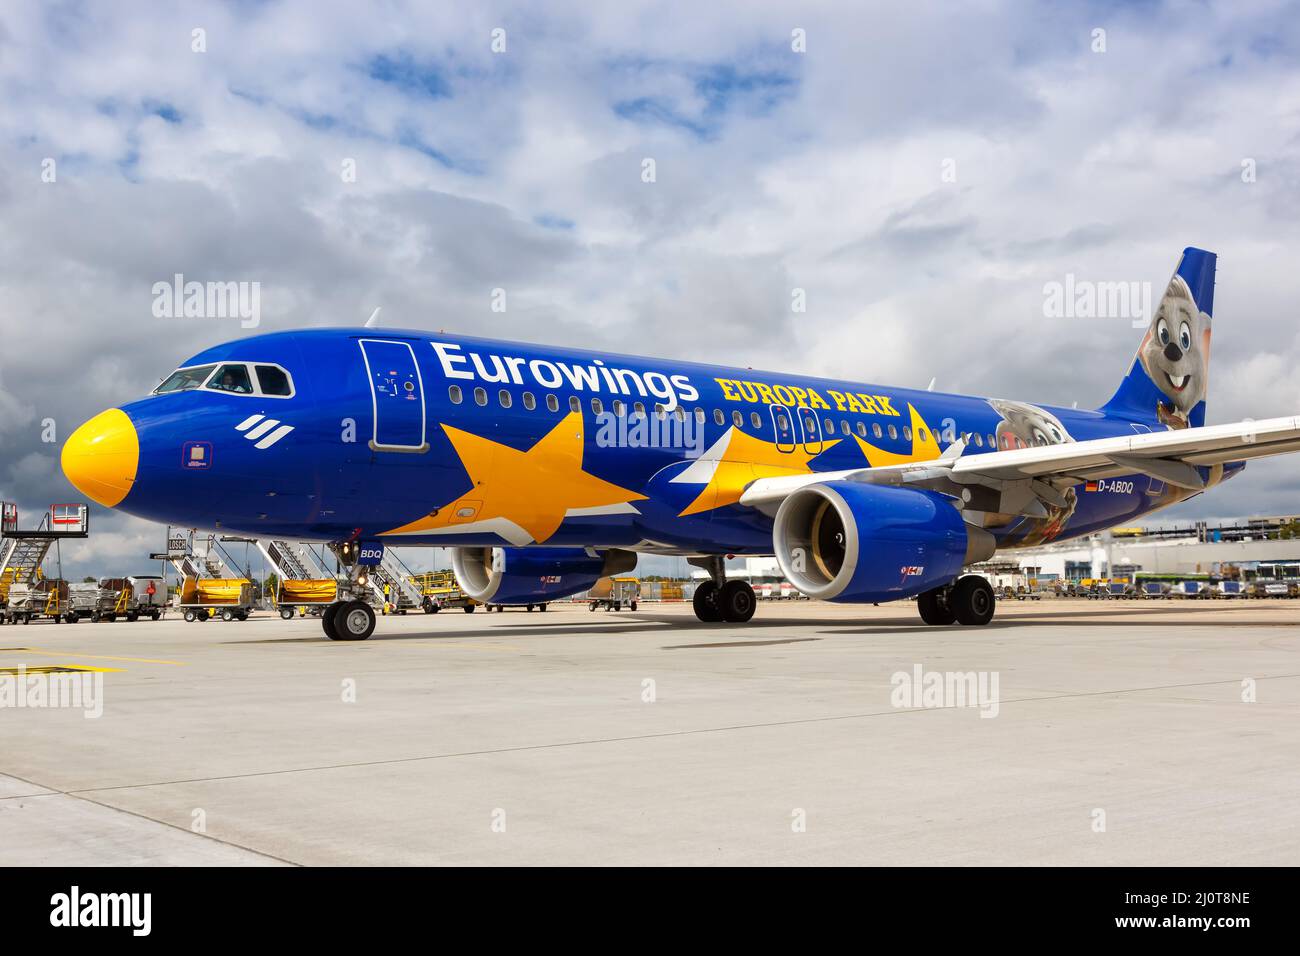 Eurowings Airbus A320 Aircraft Stuttgart Airport Europa Park pittura speciale in Germania Foto Stock